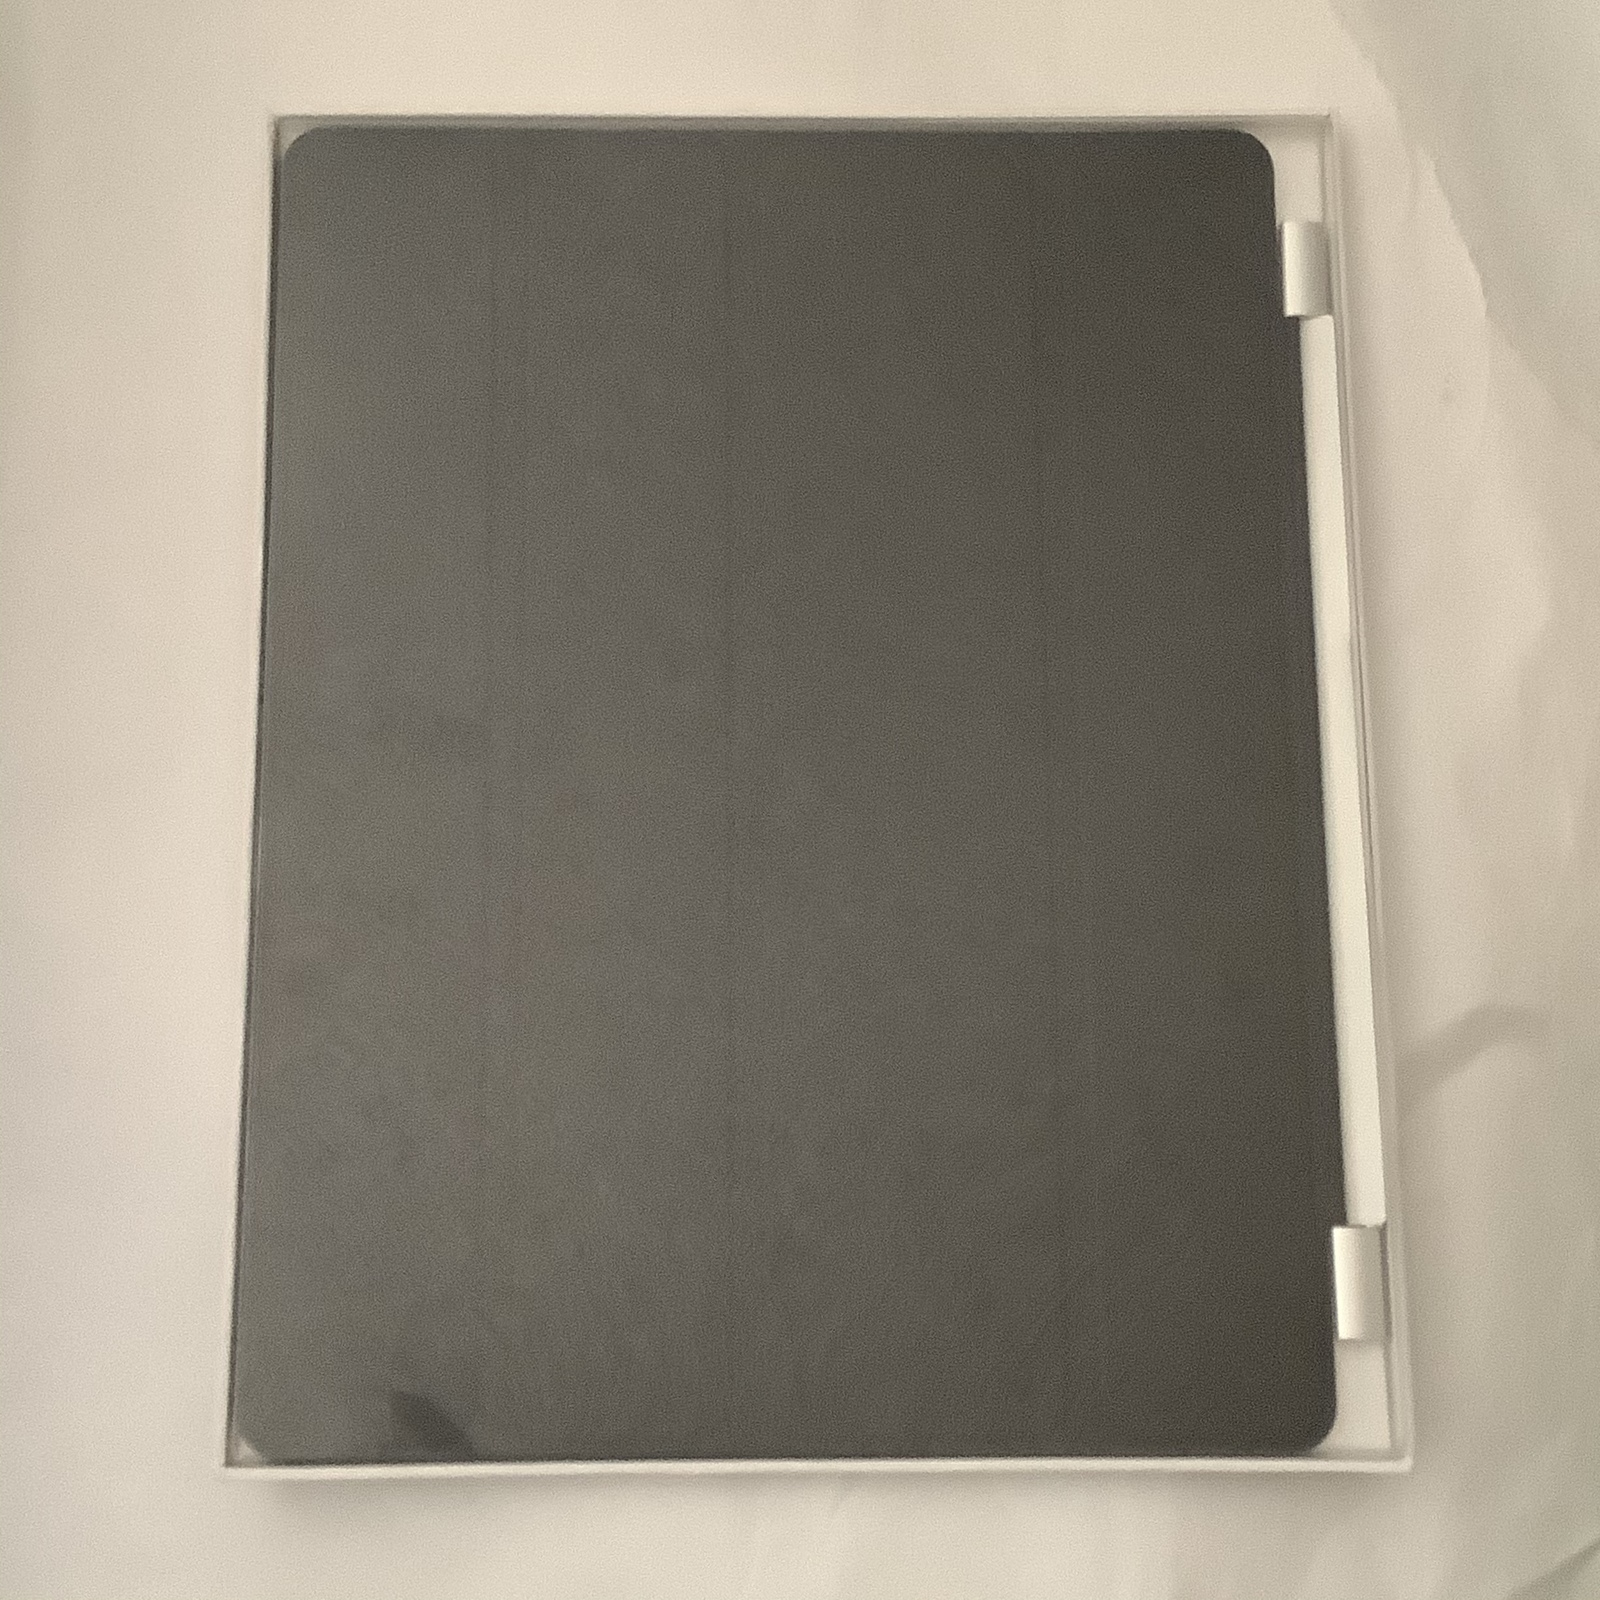 Year 2012 Apple iPad Smart Magnetic Cover for iPad 2 3 & 4 - Leather Black MC947 - $60.00